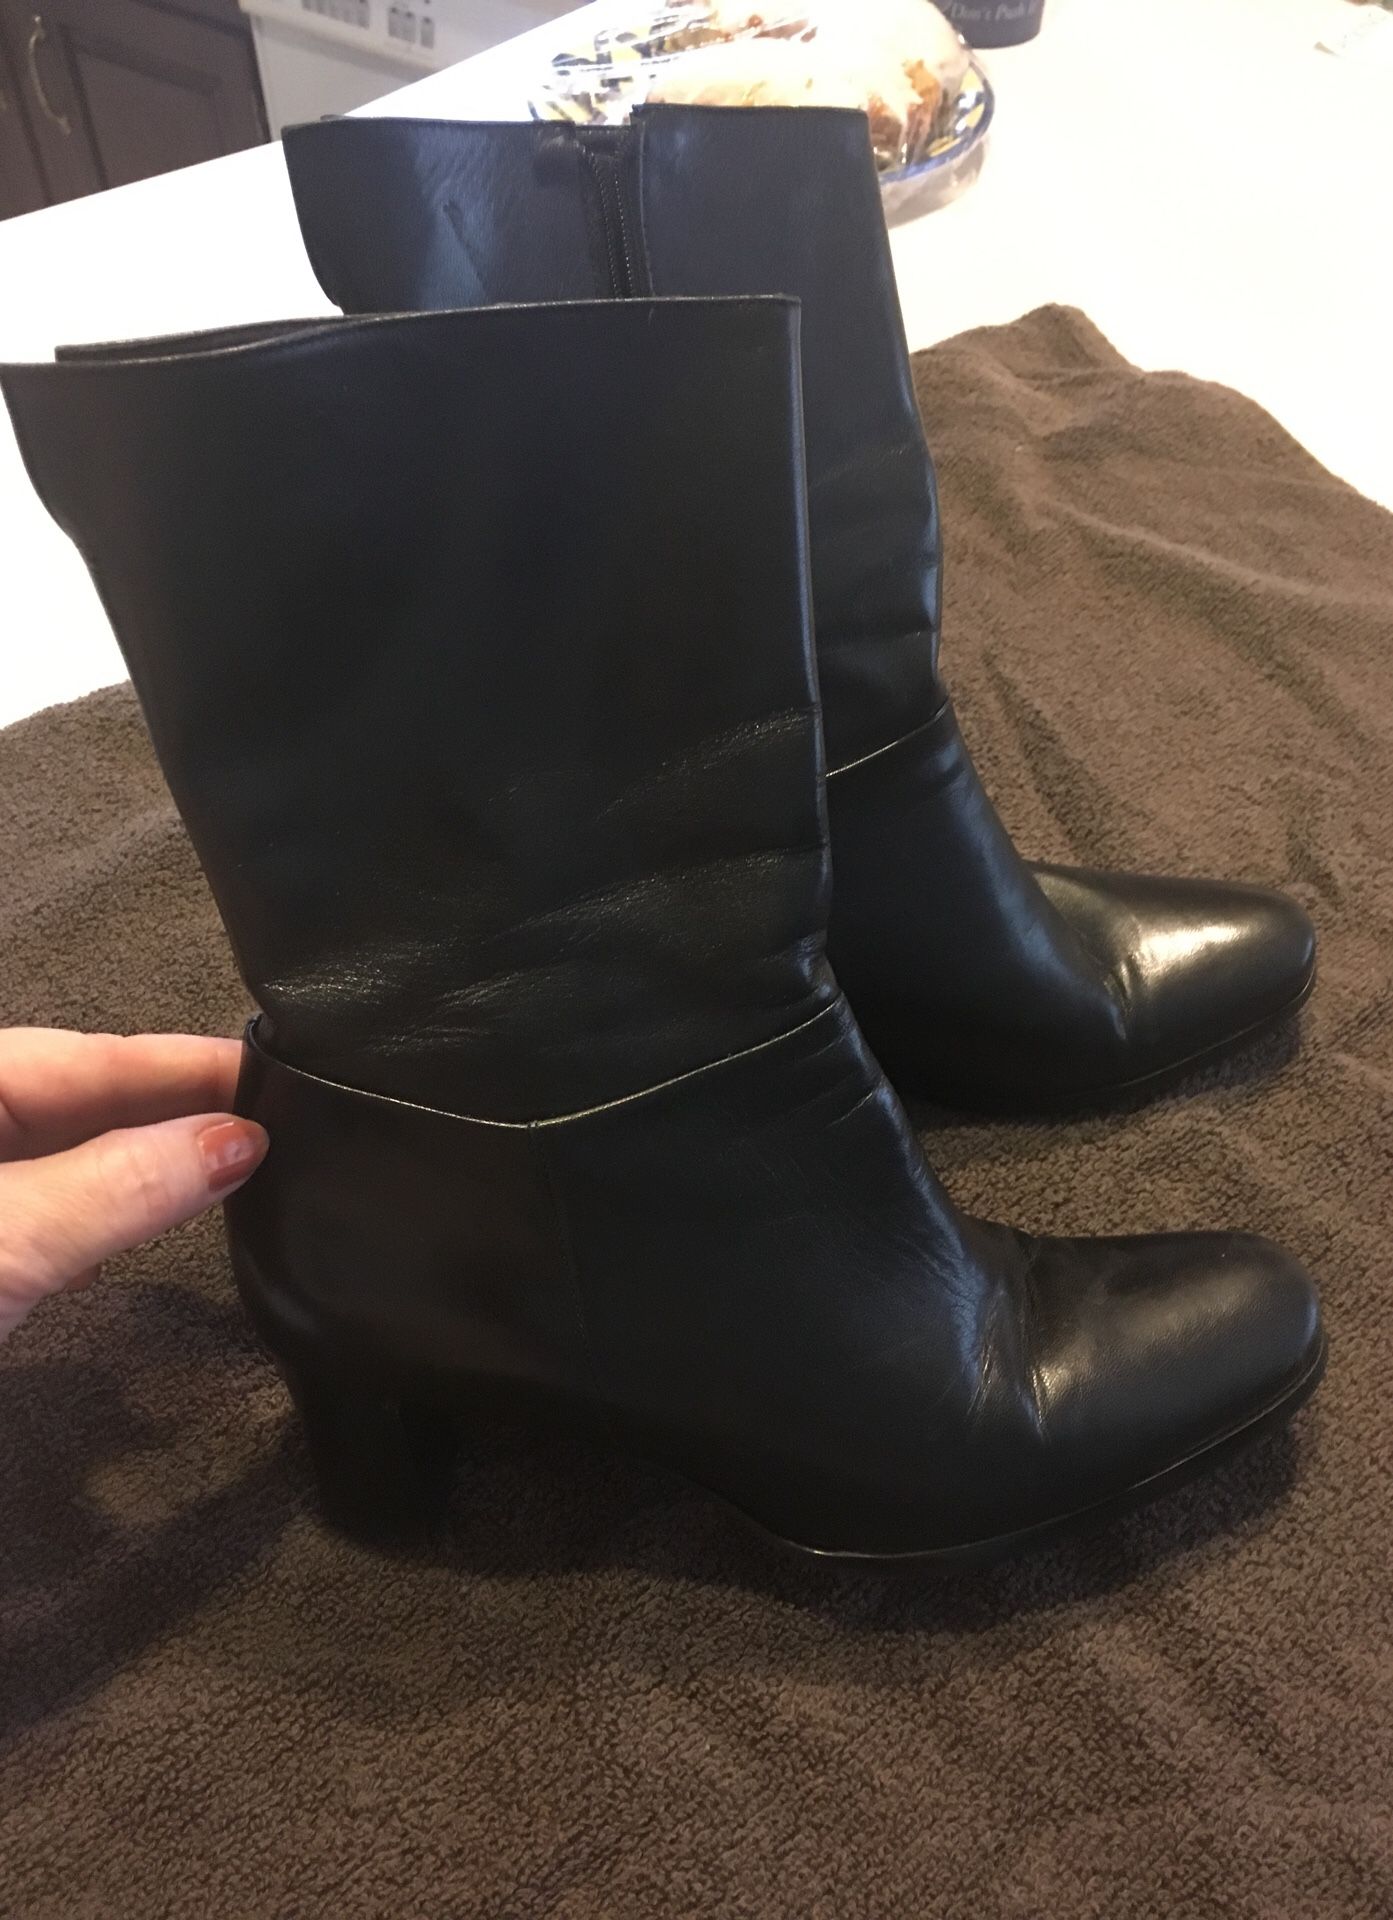 Designer boots - VERY nice quality - black size 7